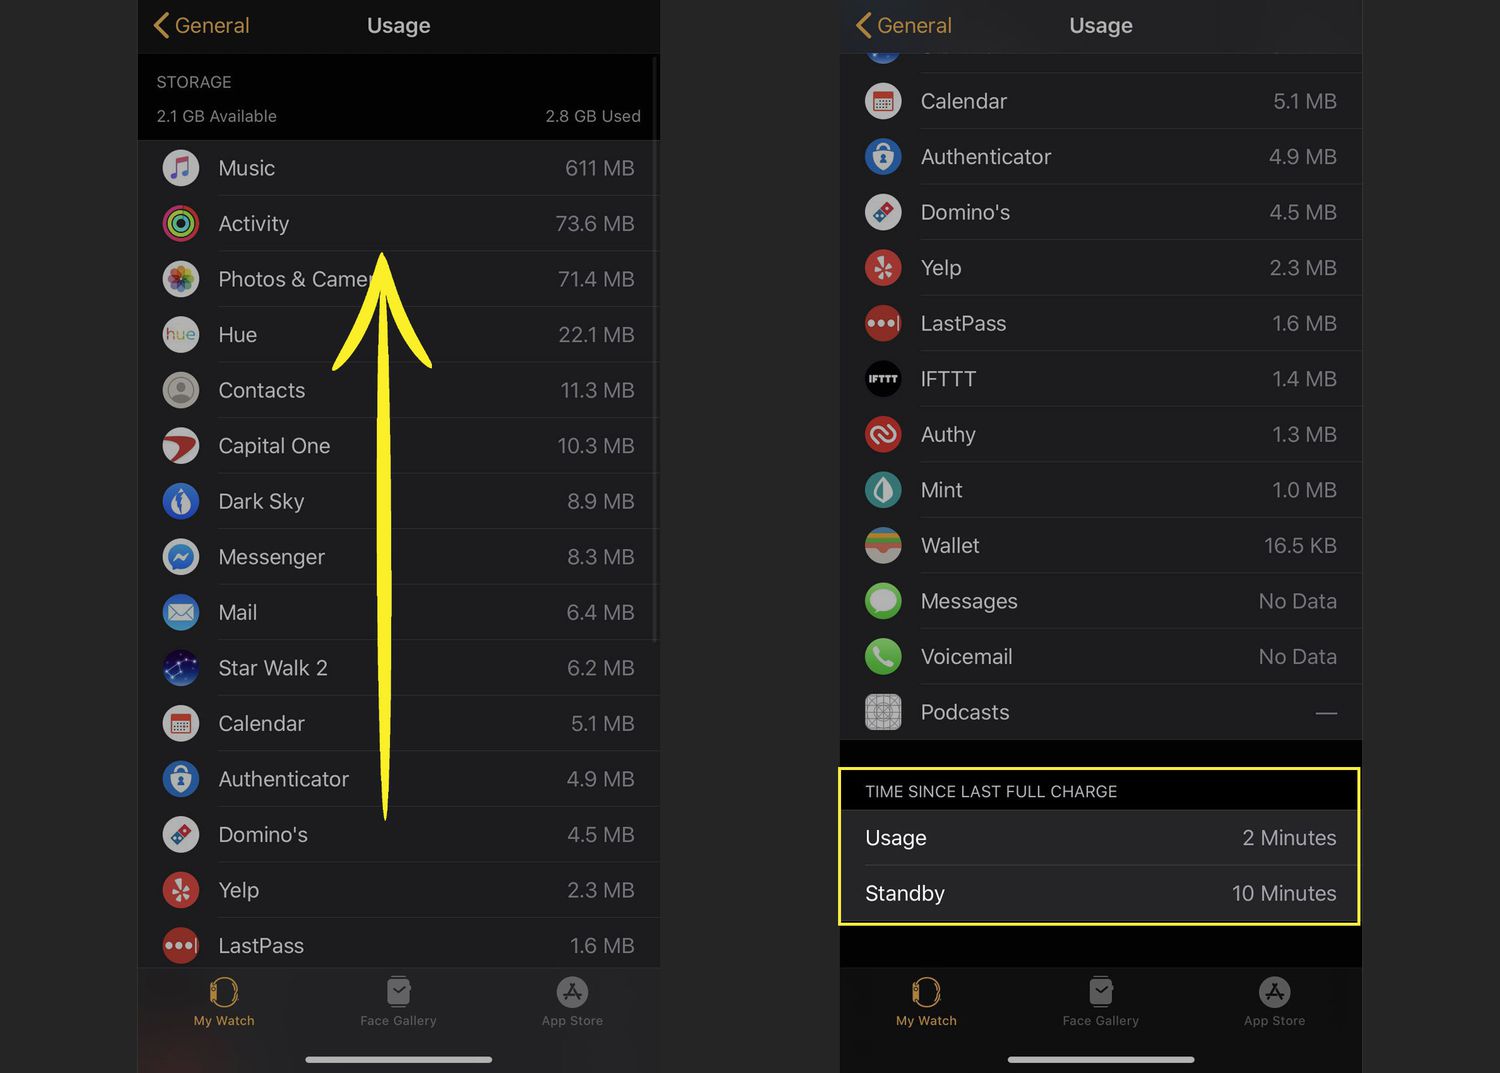 Apple Watch Usage information in the iPhone Watch app